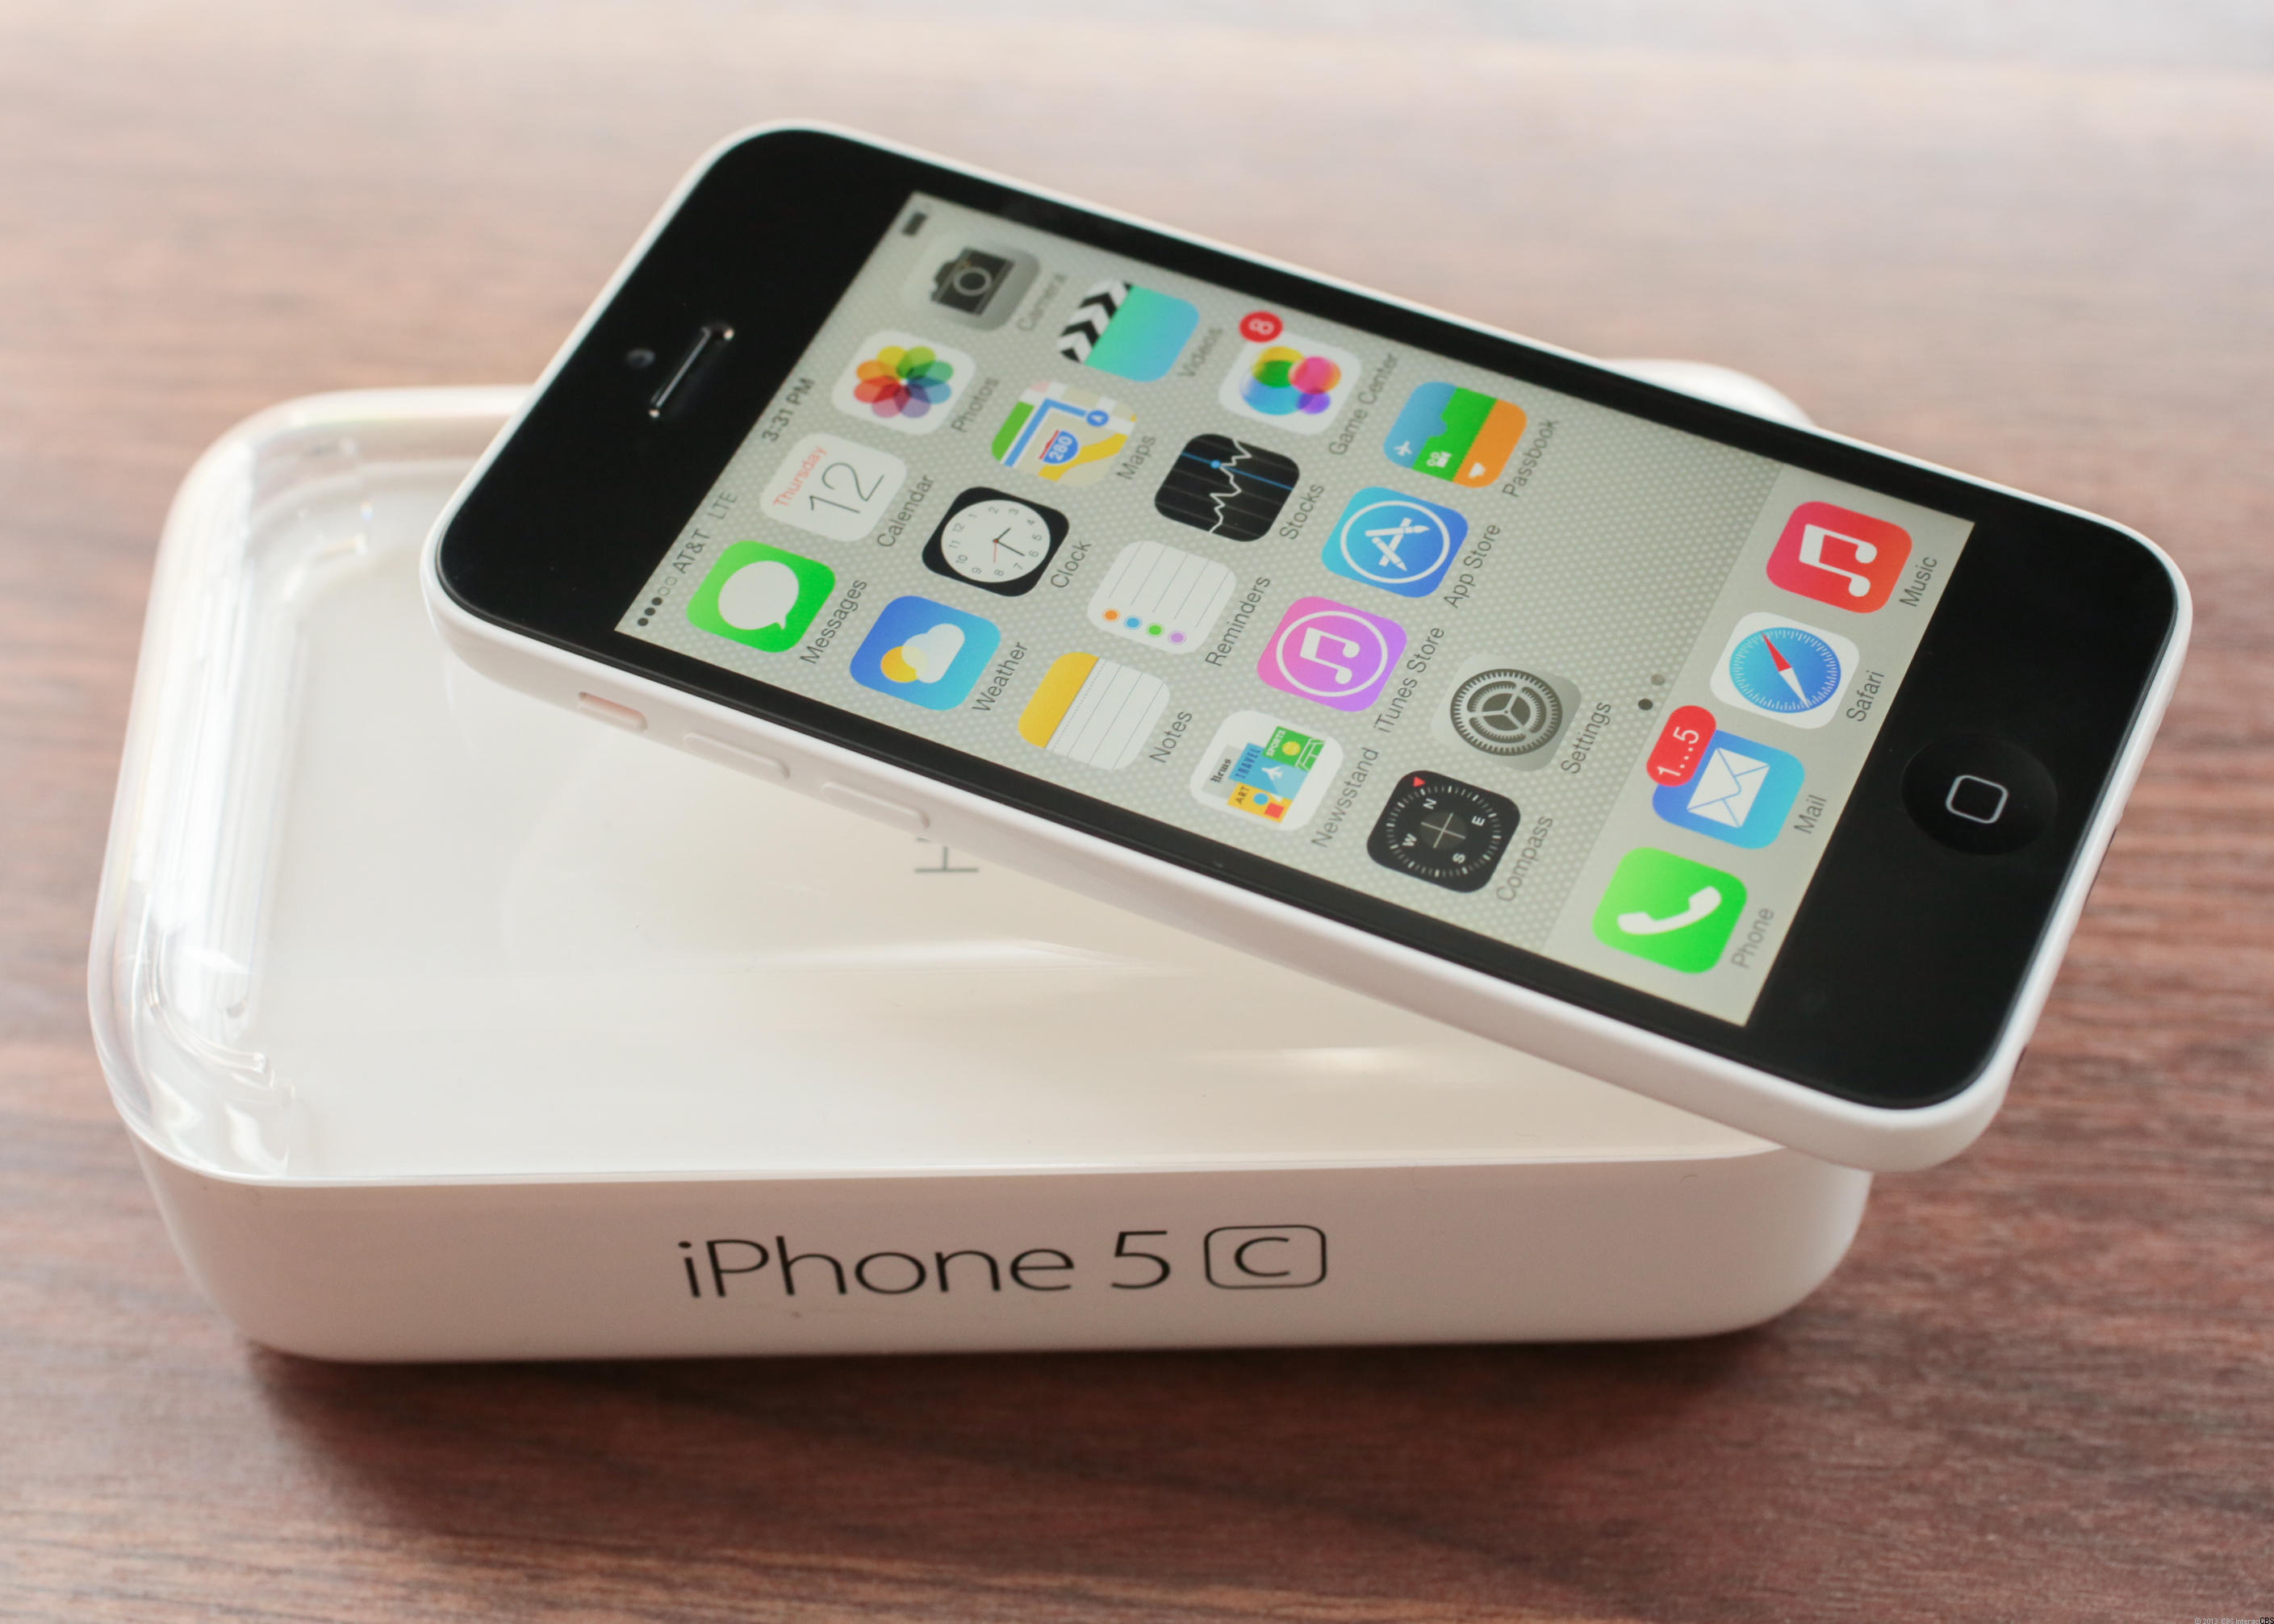 5 tips using iPhone 5C, iPhone or Apple 7 - CBS News